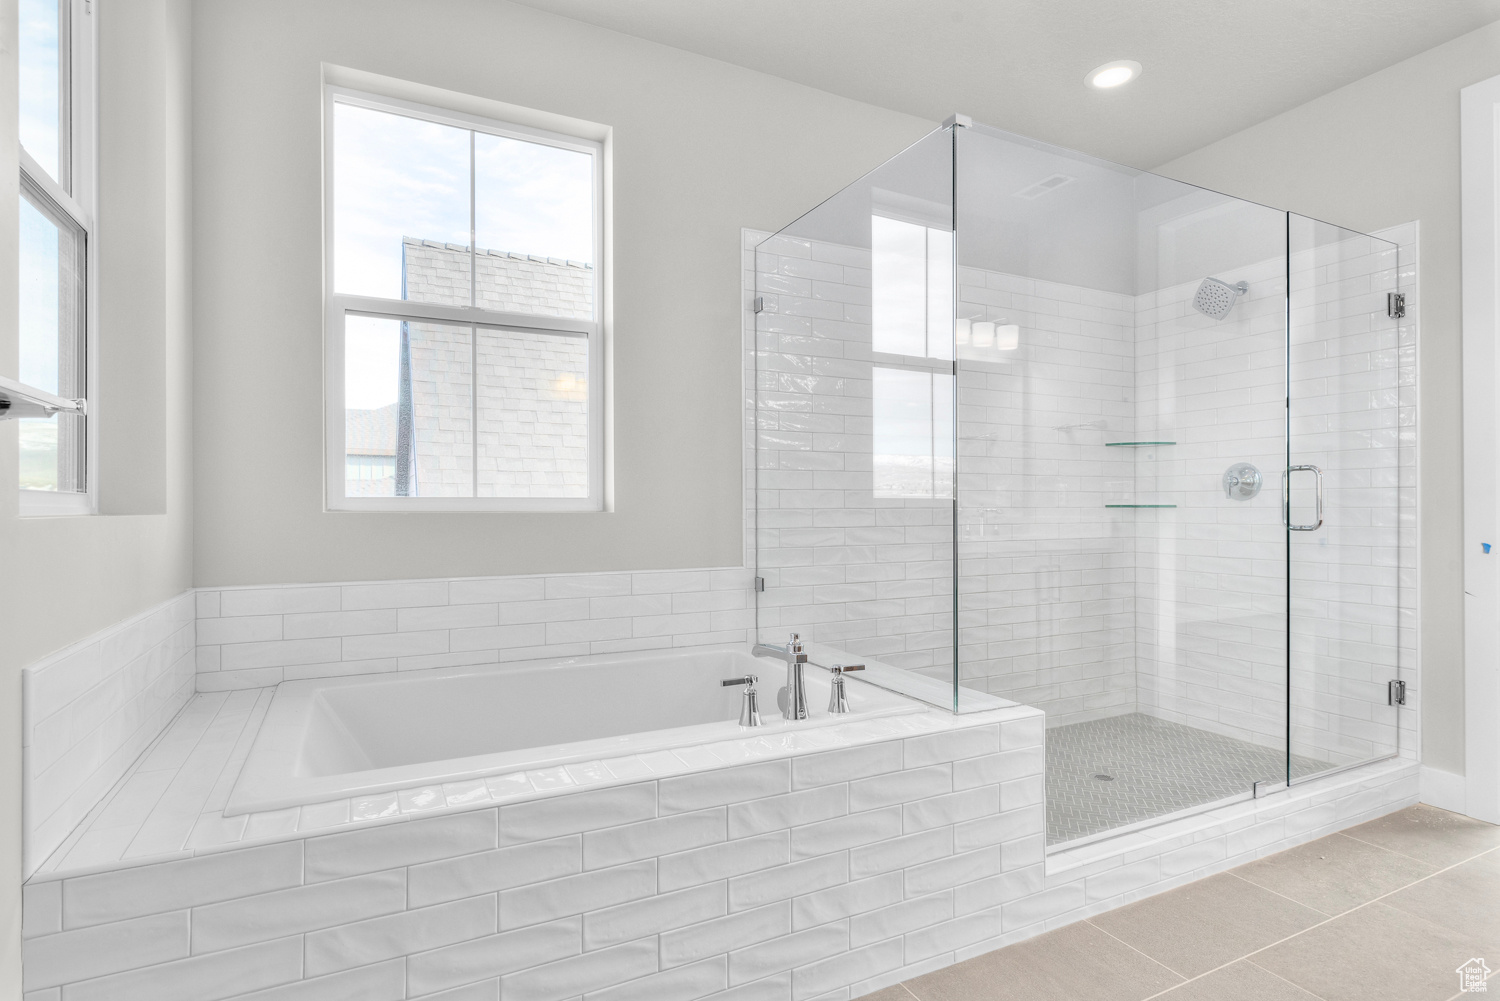 Bathroom featuring tile floors, a wealth of natural light, and plus walk in shower